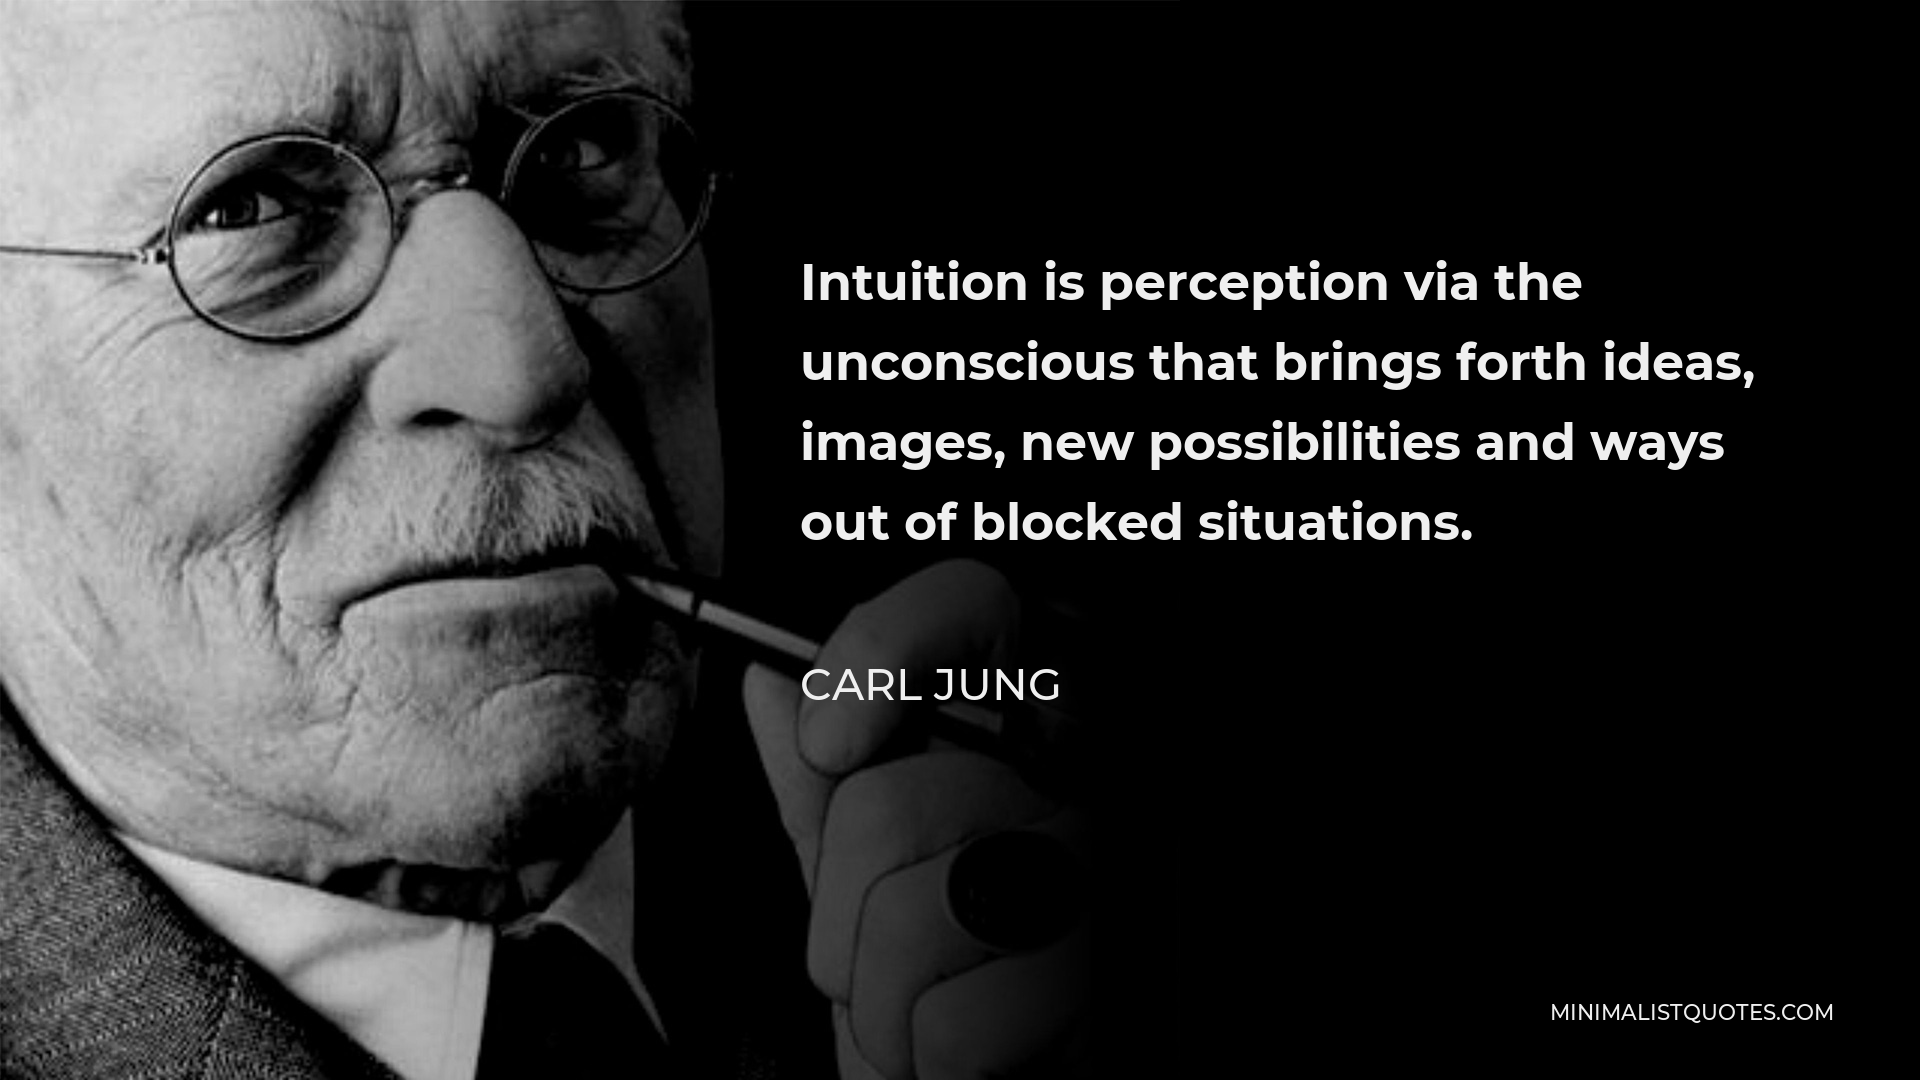 Carl Jung Quote - Intuition is perception via the unconscious that brings forth ideas, images, new possibilities and ways out of blocked situations.